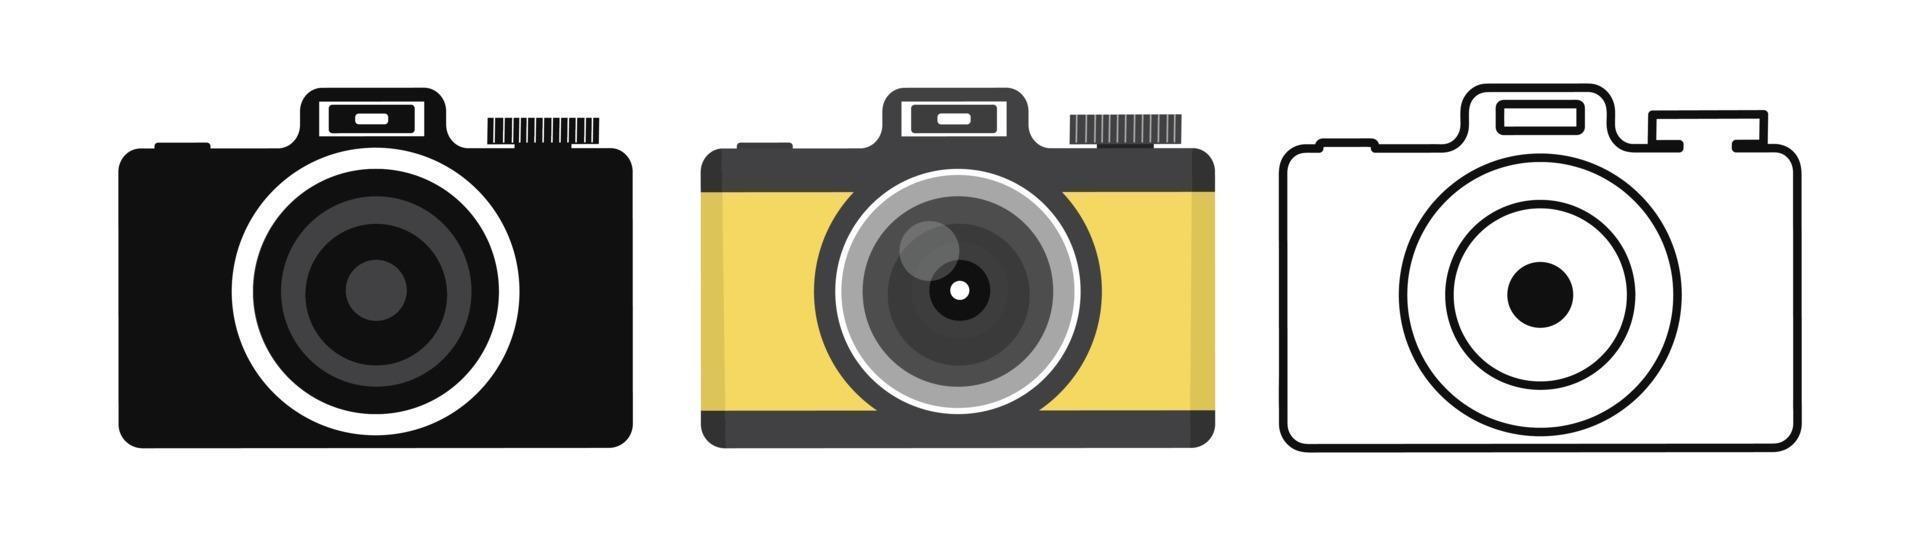 Camera icon in flat style set vector